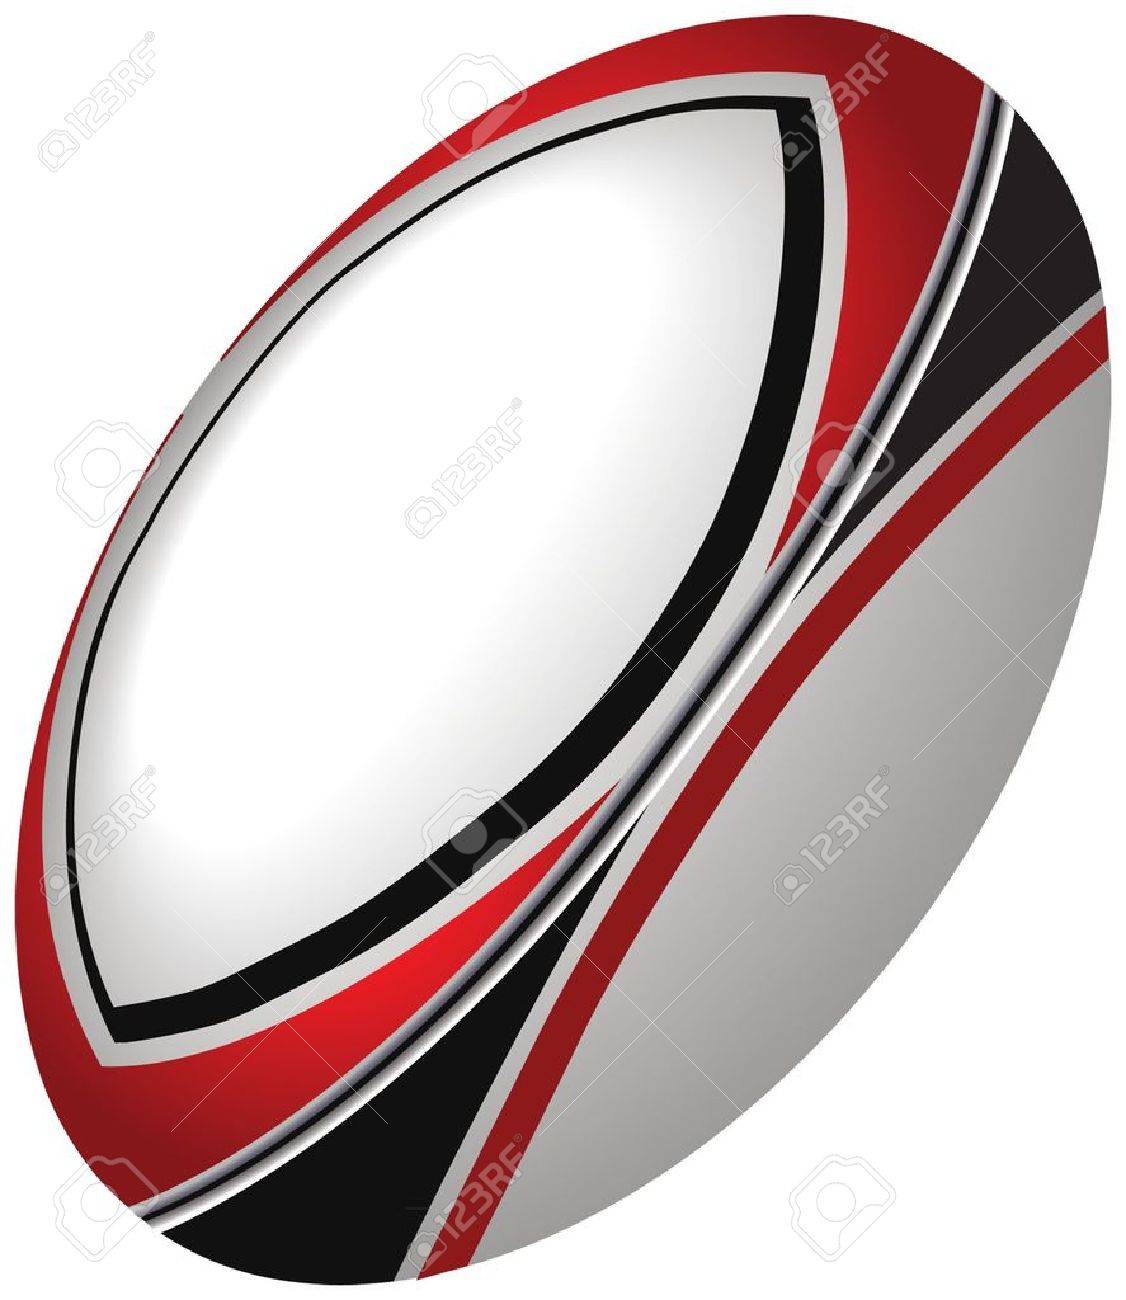 rugby-ball-png-picture-rugby-